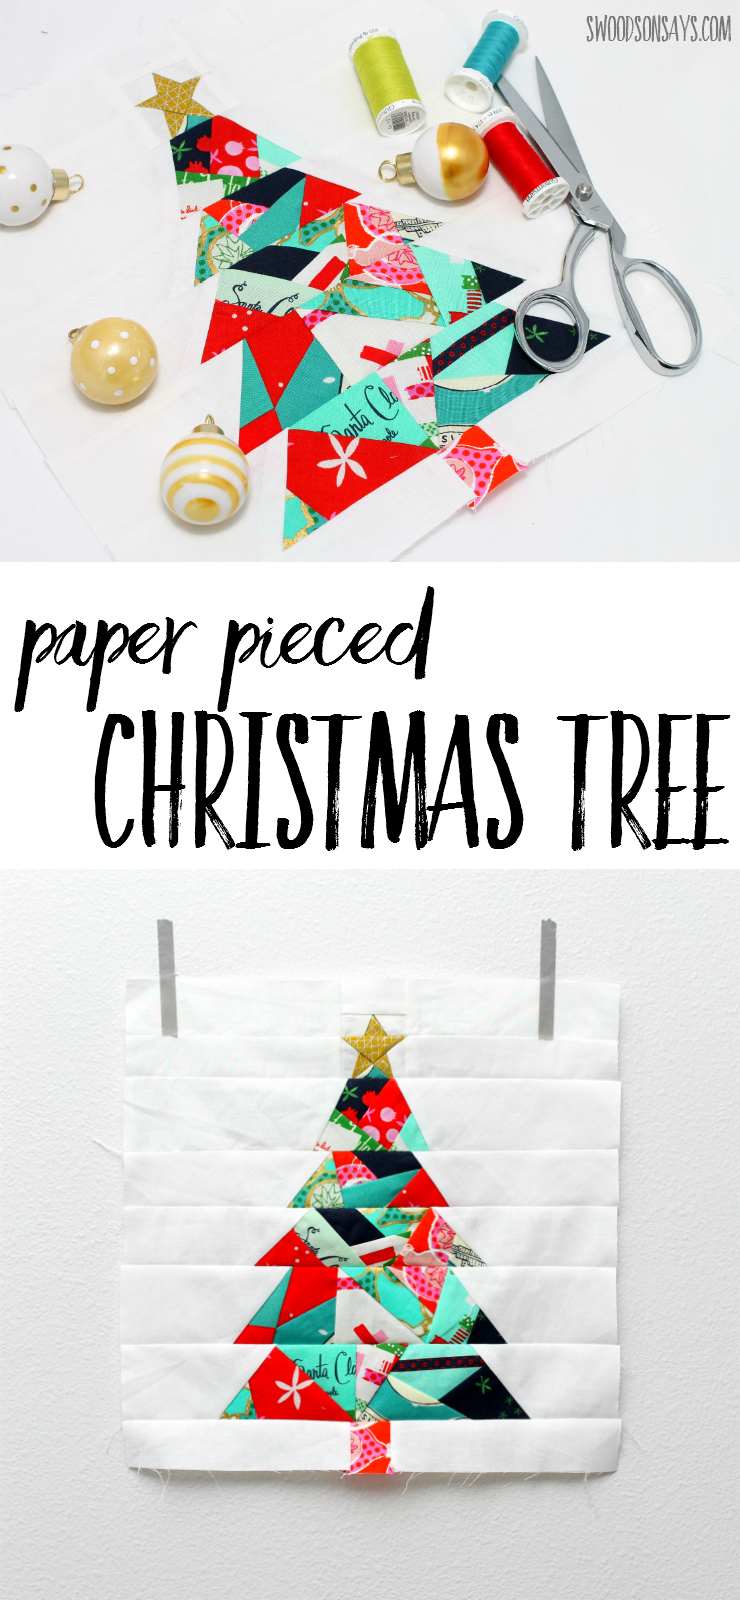 Check out this paper pieced Christmas tree! A modern Christmas quilt sewing pattern, it's a great first paper piecing pattern to try and uses up the smallest of scraps. Great for: christmas gifts to sew - christmas quilts - christmas paper piecing patterns - Christmas trees to sew.